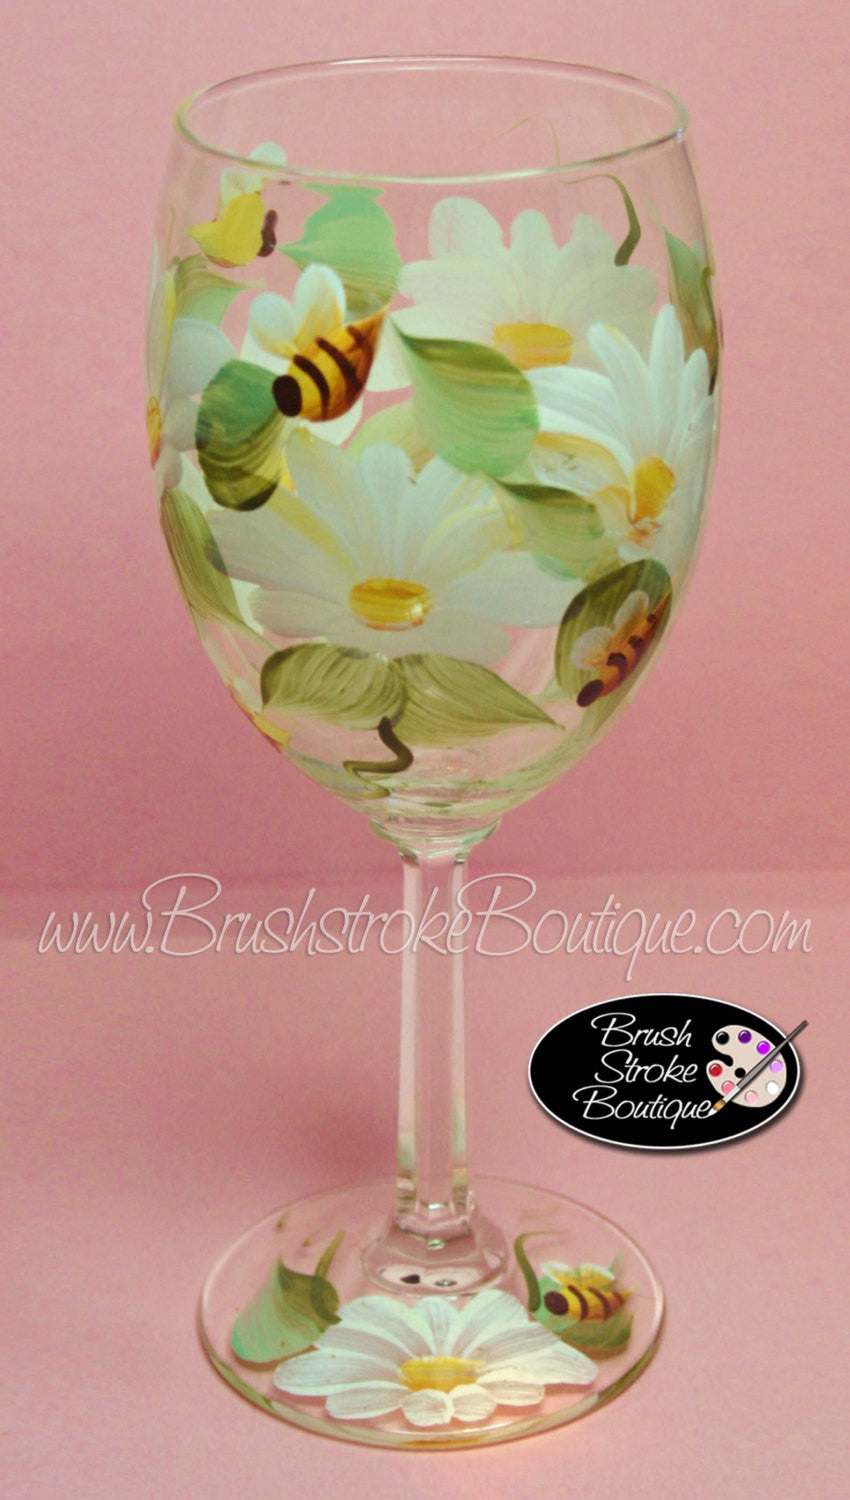 Hand Painted Wine Glass - Daisies and Bees - Original Designs by Cathy Kraemer